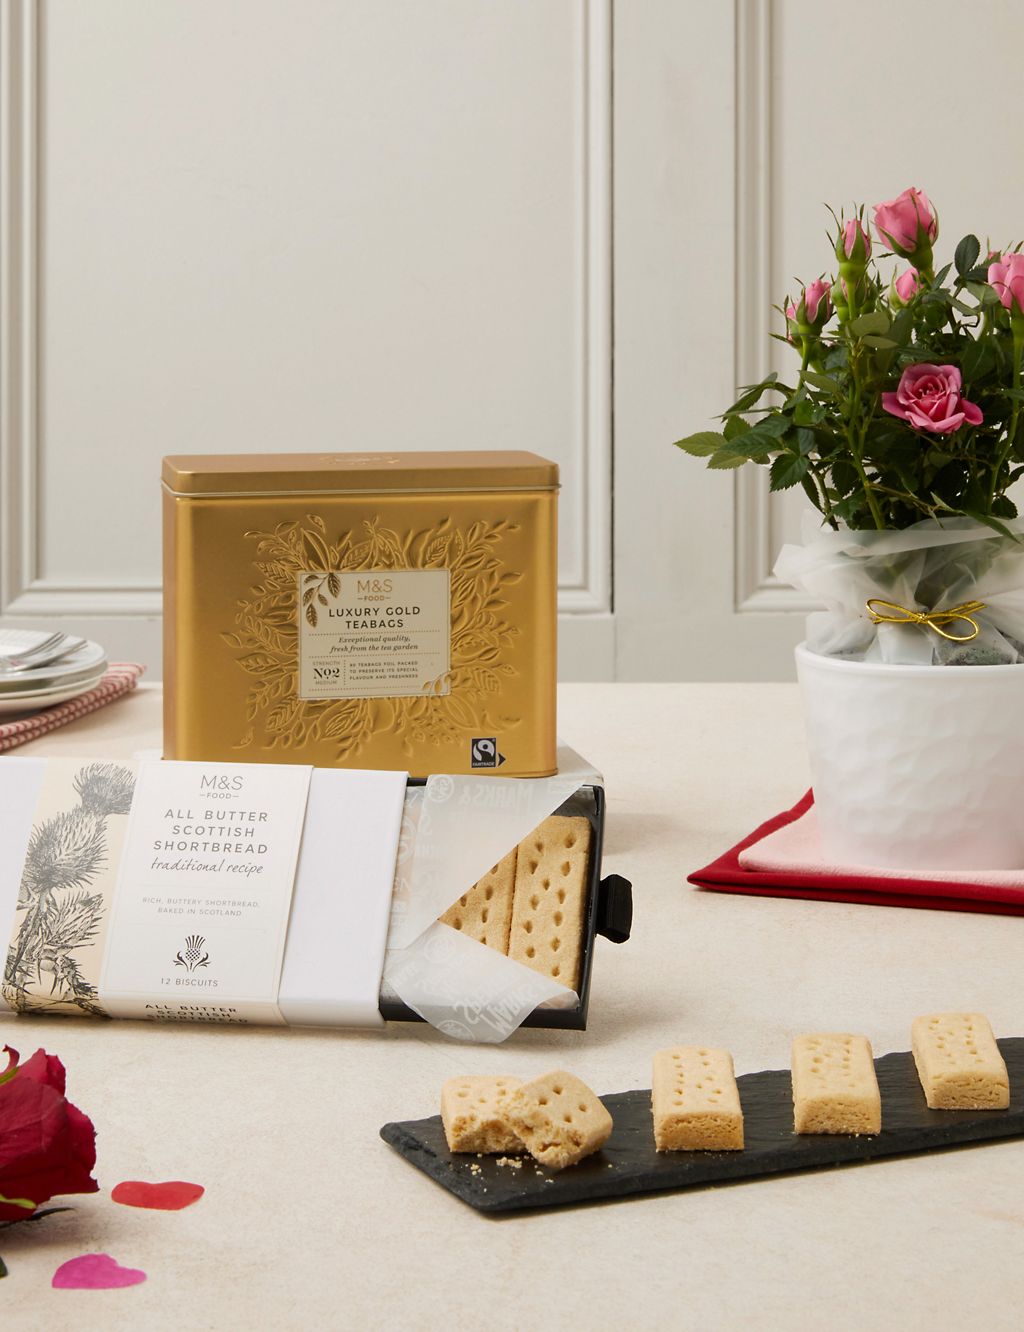 Rose Plant with Luxury Gold Tea & All Butter Shortbread Biscuits Gift 1 of 2